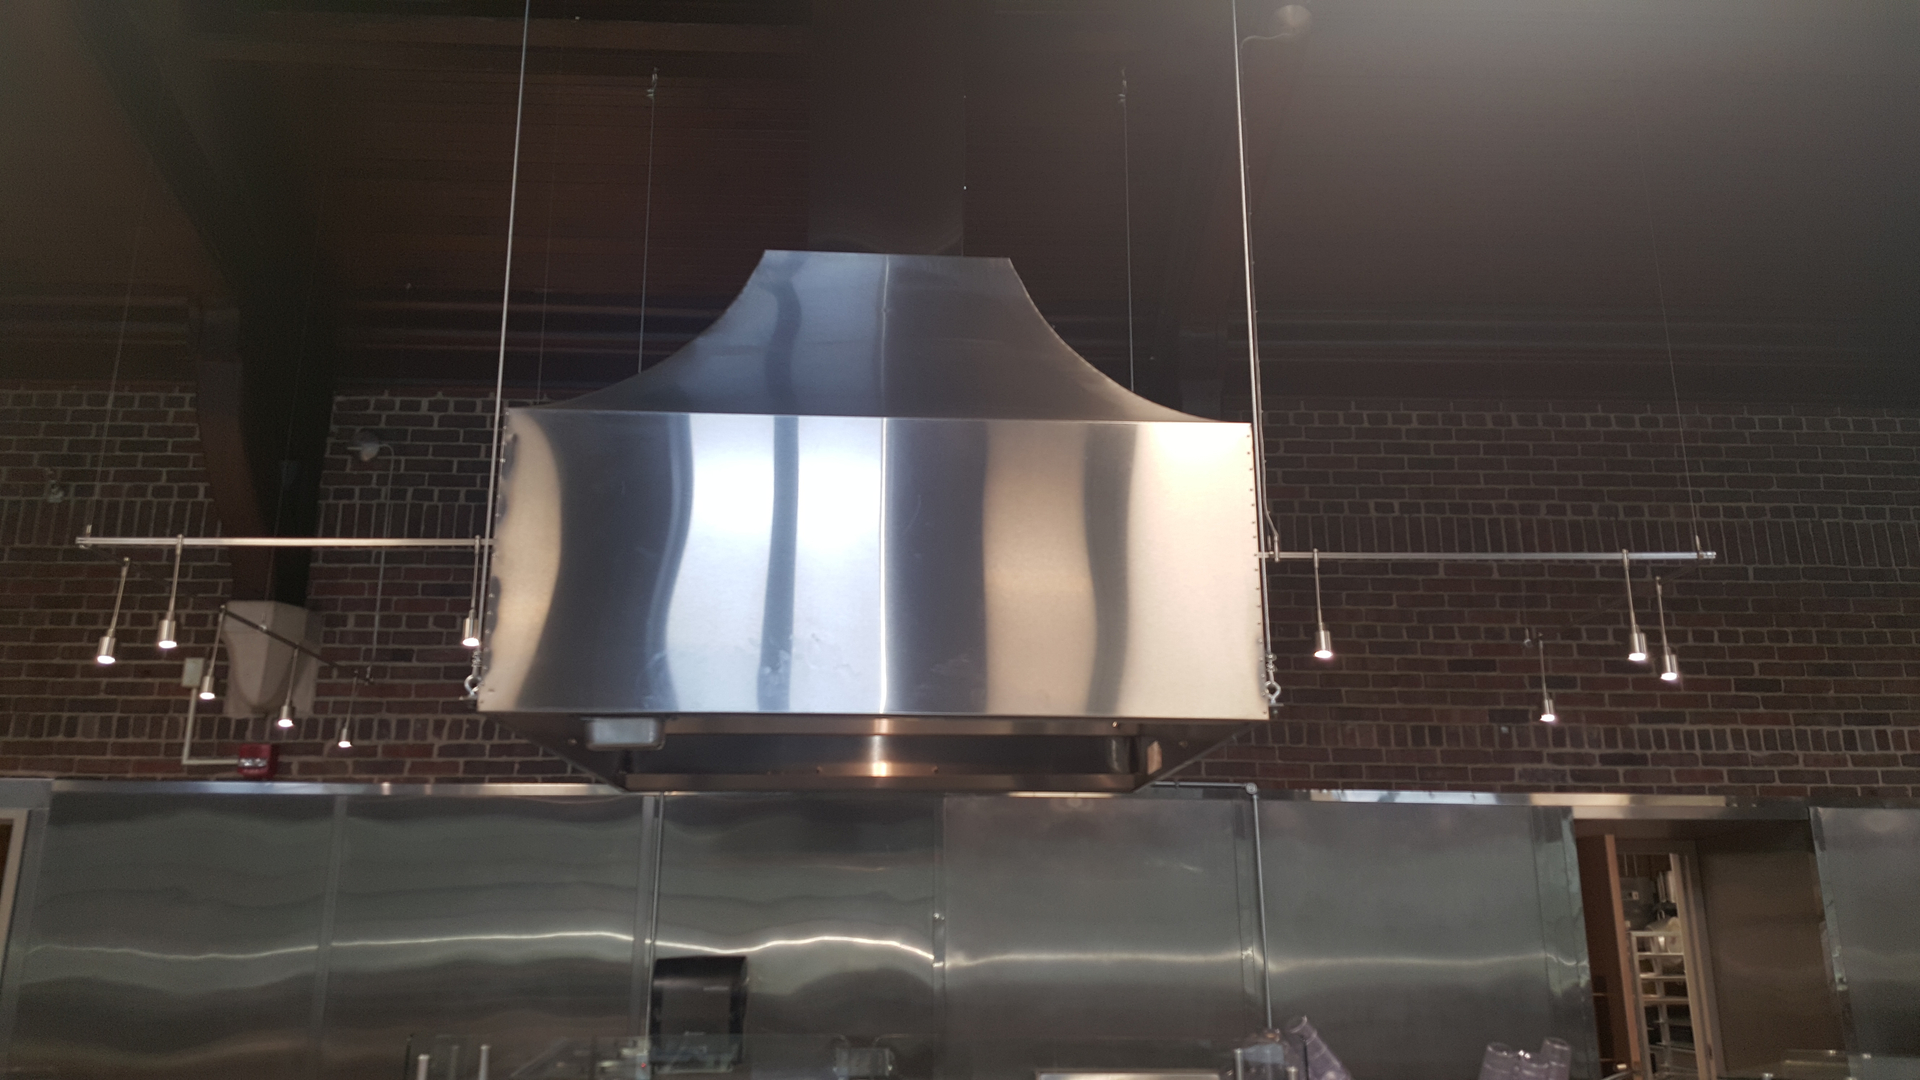 Commercial kitchen vent covers